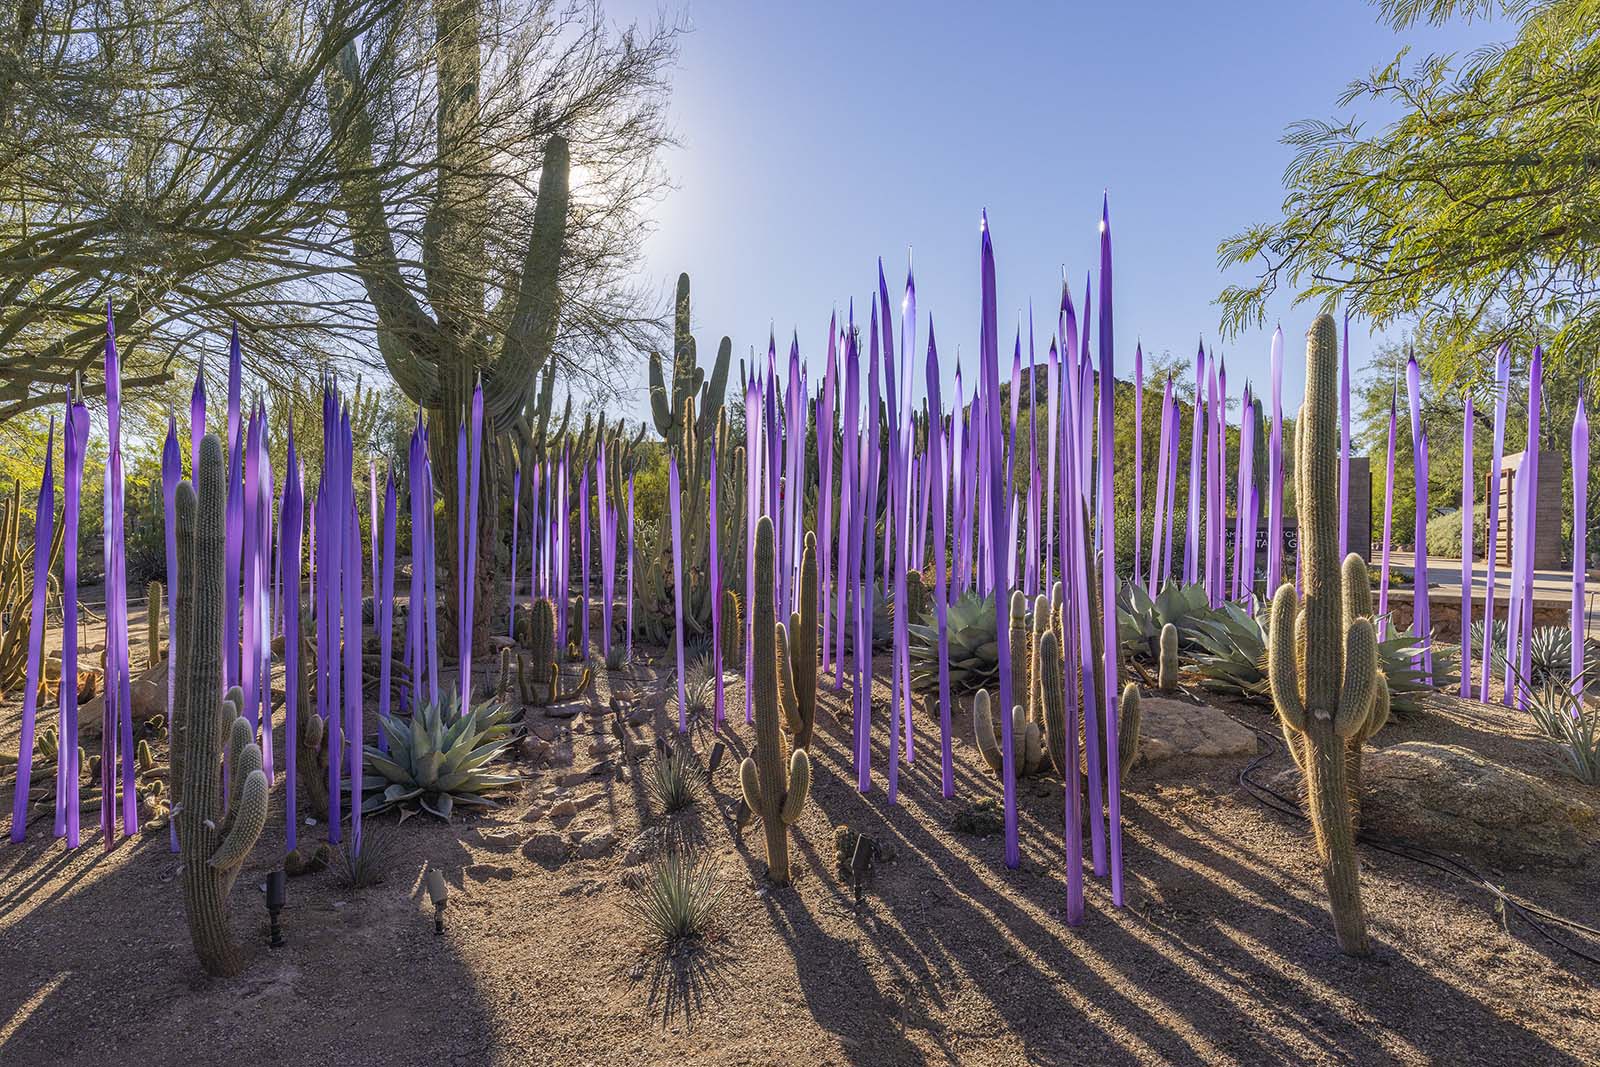 Neodymium Reeds, 2021 by Dale Chihuly